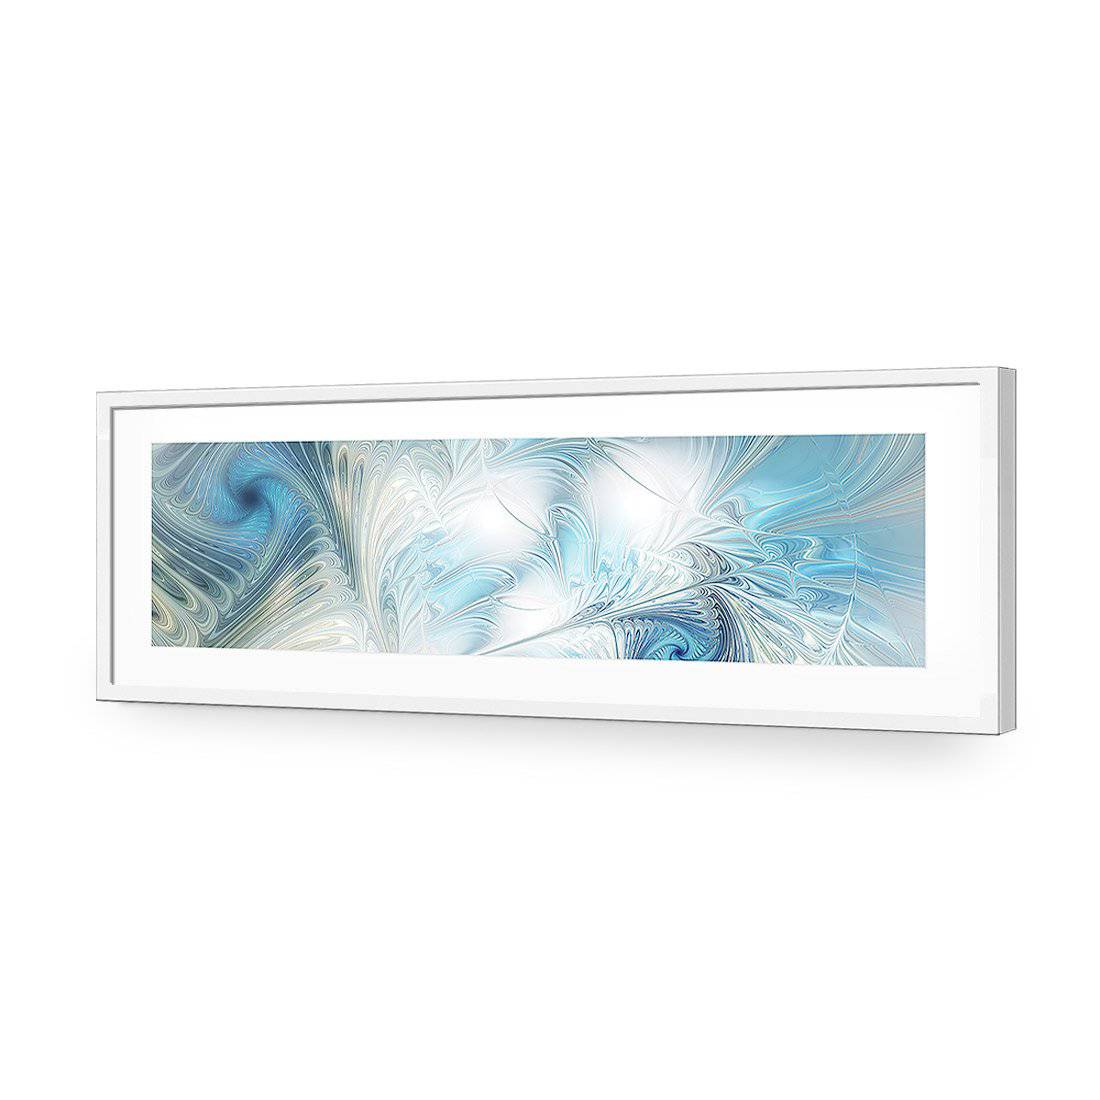 Travesty, Long-Acrylic-Wall Art Design-With Border-Acrylic - White Frame-60x20cm-Wall Art Designs